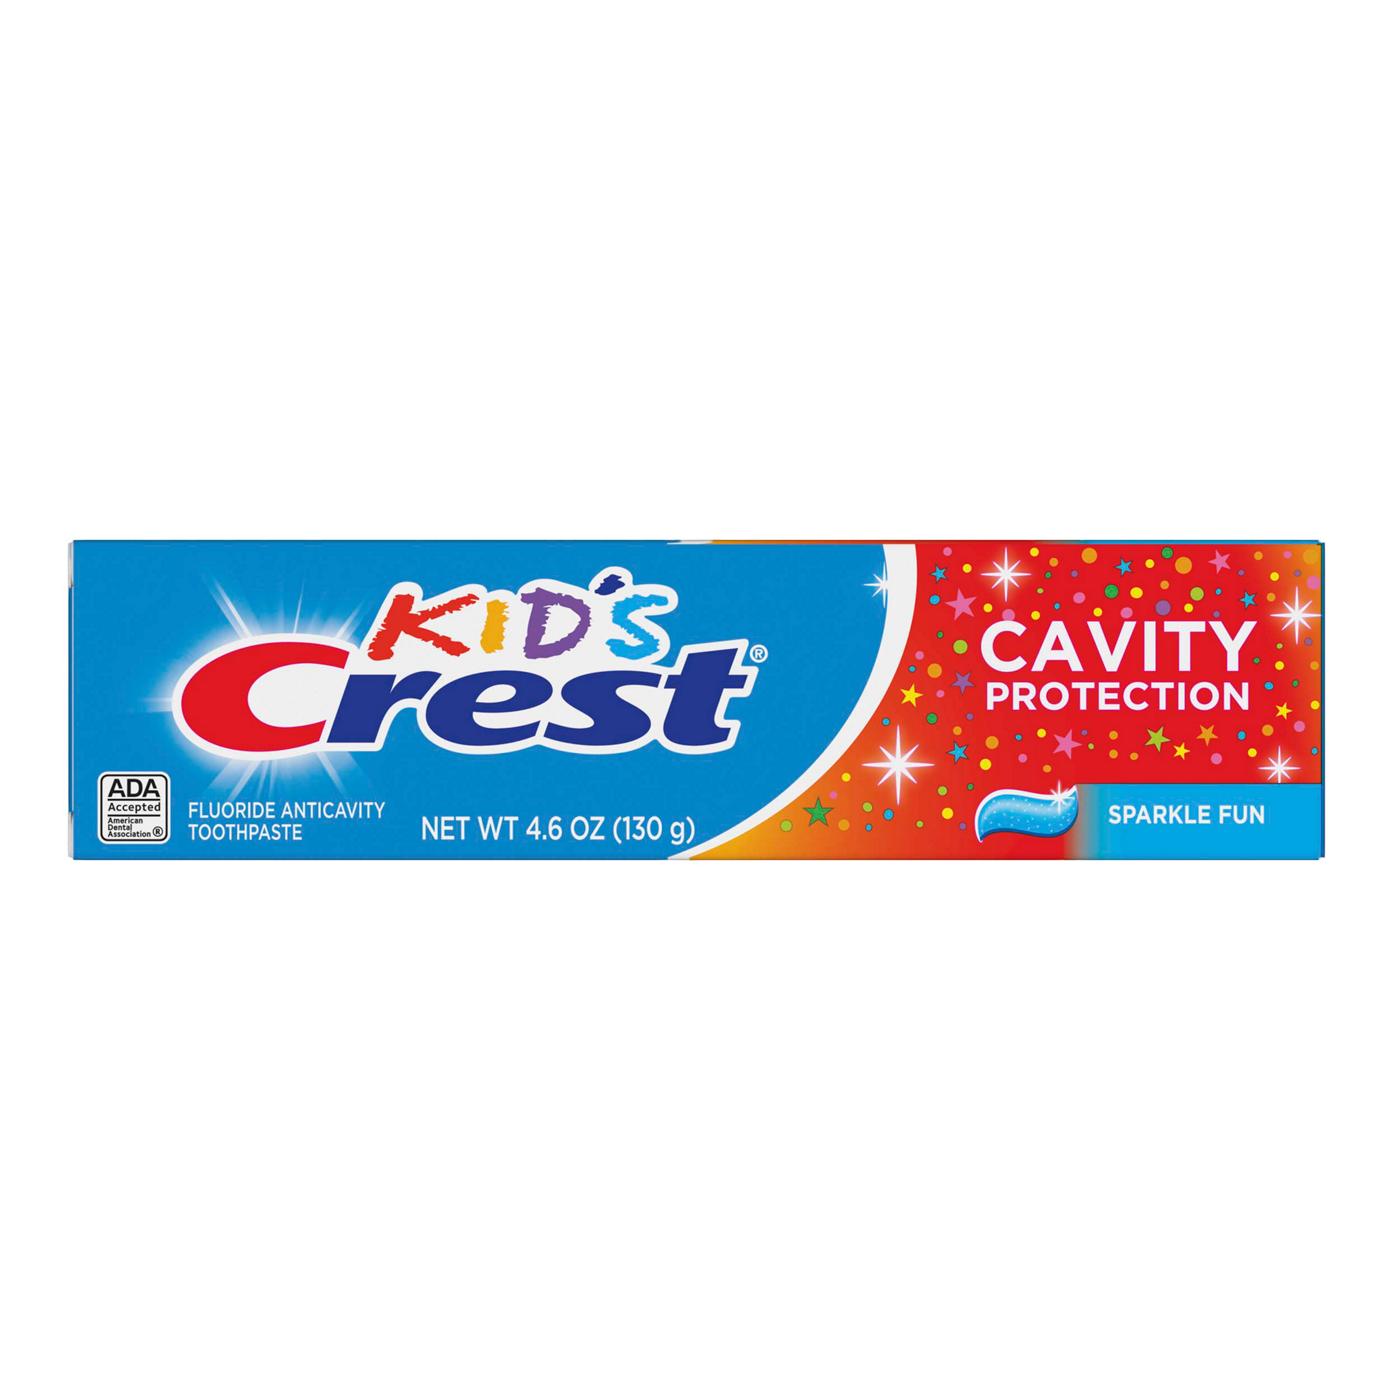 Crest Kid's Cavity Protection Toothpaste - Sparkle Fun; image 1 of 8